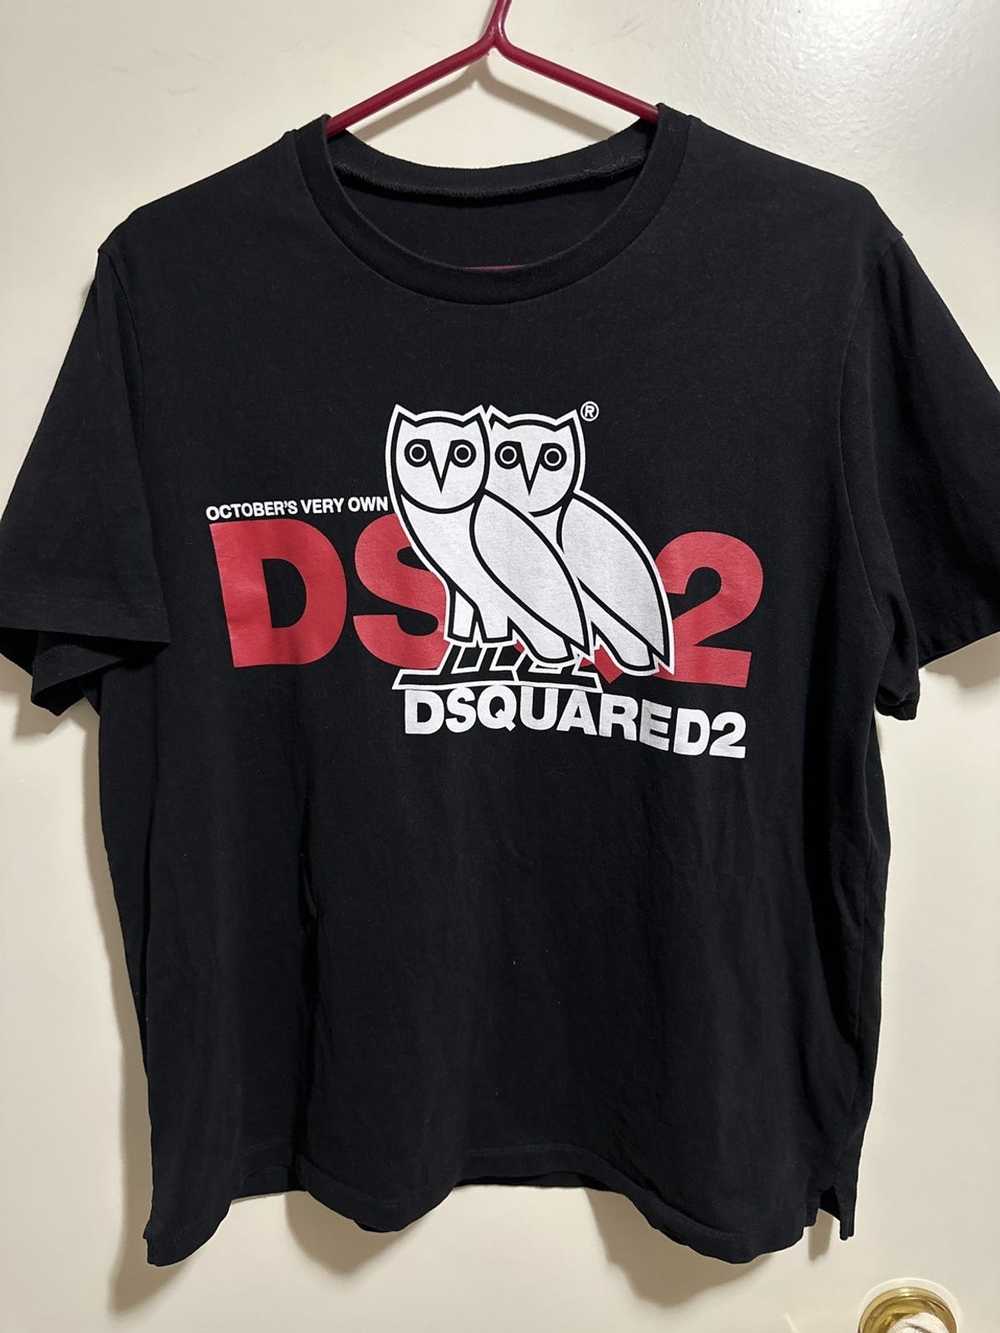 Dsquared2 × Octobers Very Own Ovo dsquared owl red - image 1